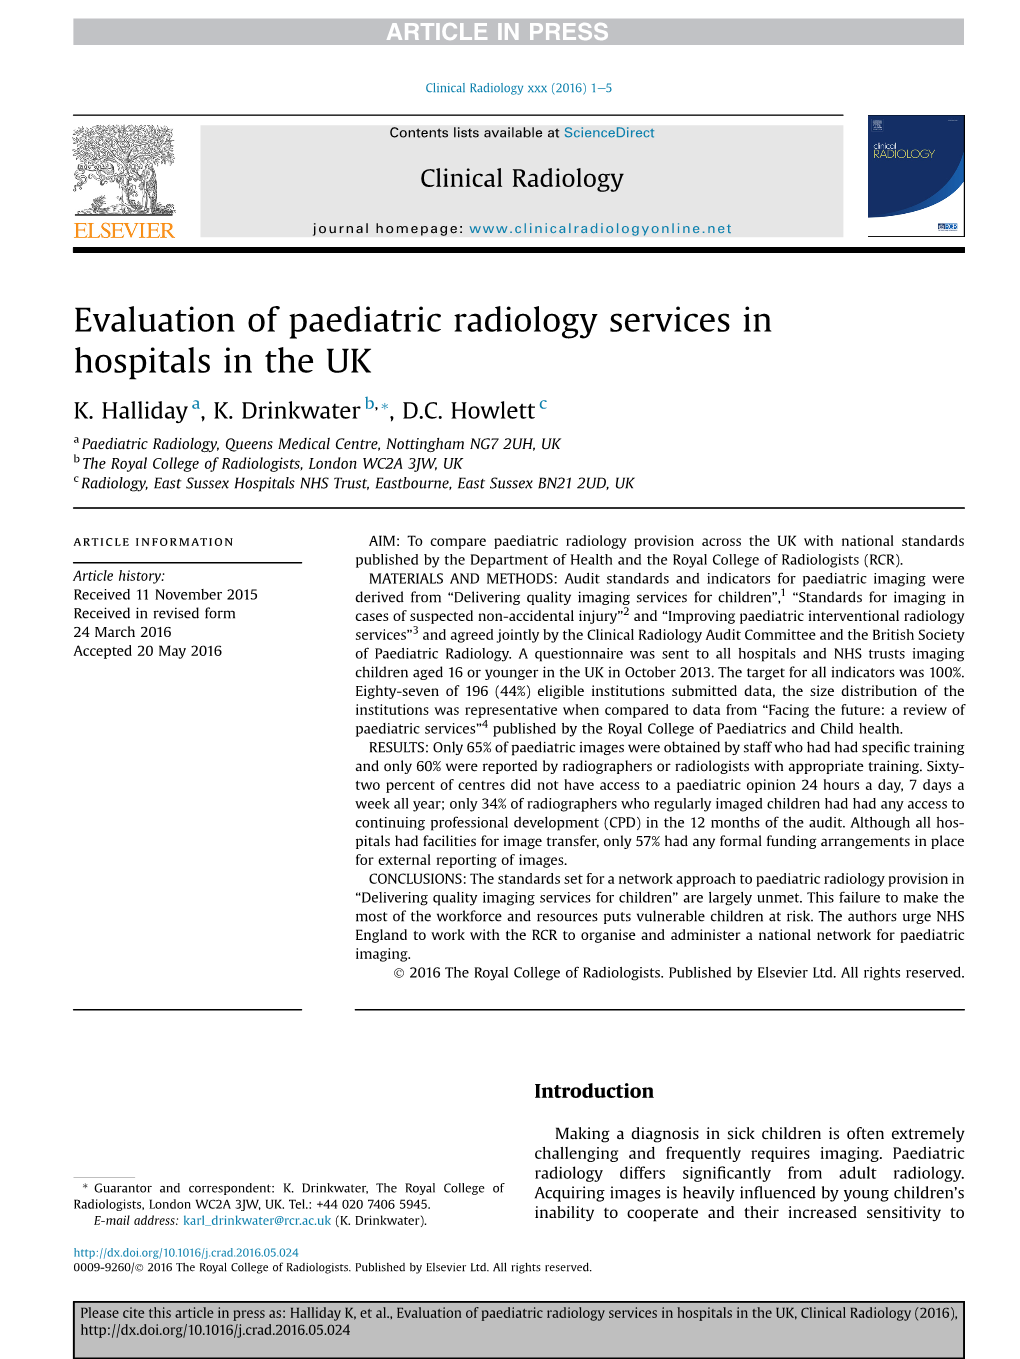 Evaluation of Paediatric Radiology Services in Hospitals in the UK K